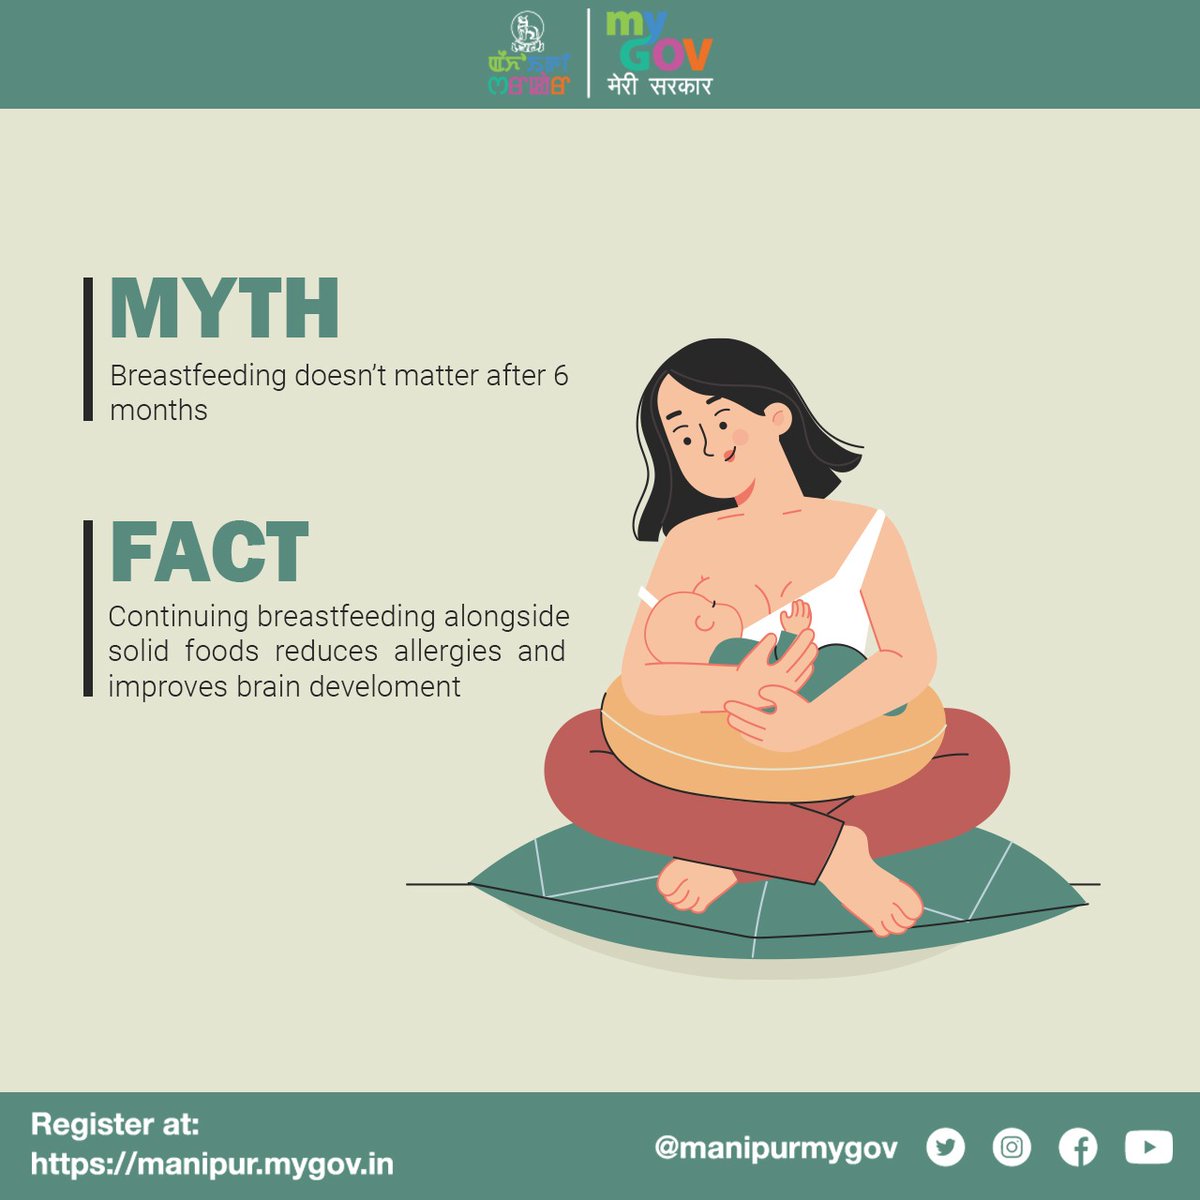 While breastfeeding is natural, it doesn't always come easily. It can take time for both mother and baby. The World Health Organization recommends breastfeeding for at least the first two years of a child's life, alongside appropriate complementary foods.